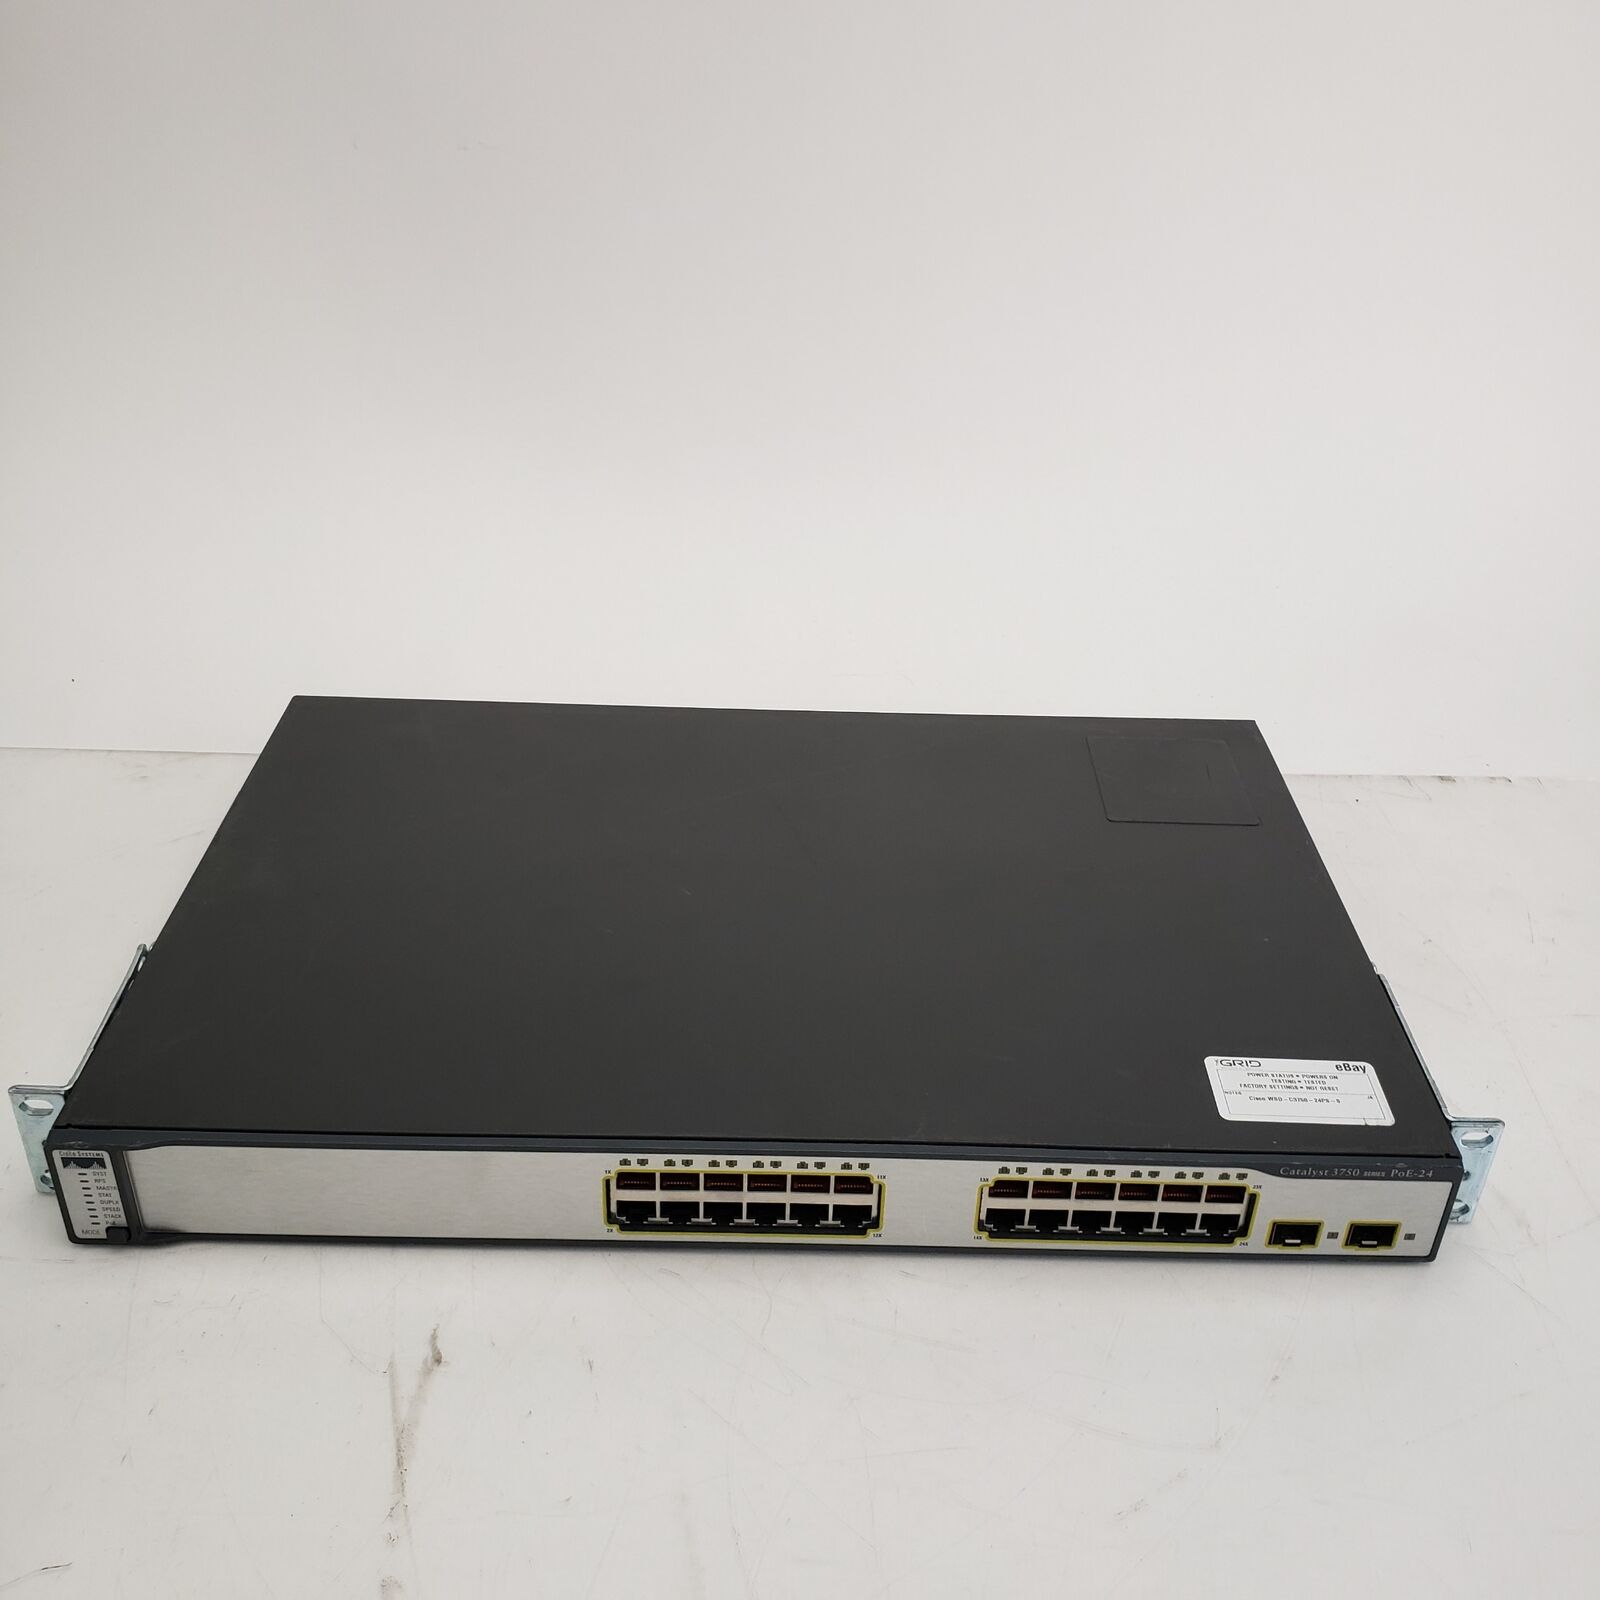 Cisco WS-C3750-24PS-S 24-Port Ethernet Switch - Tested